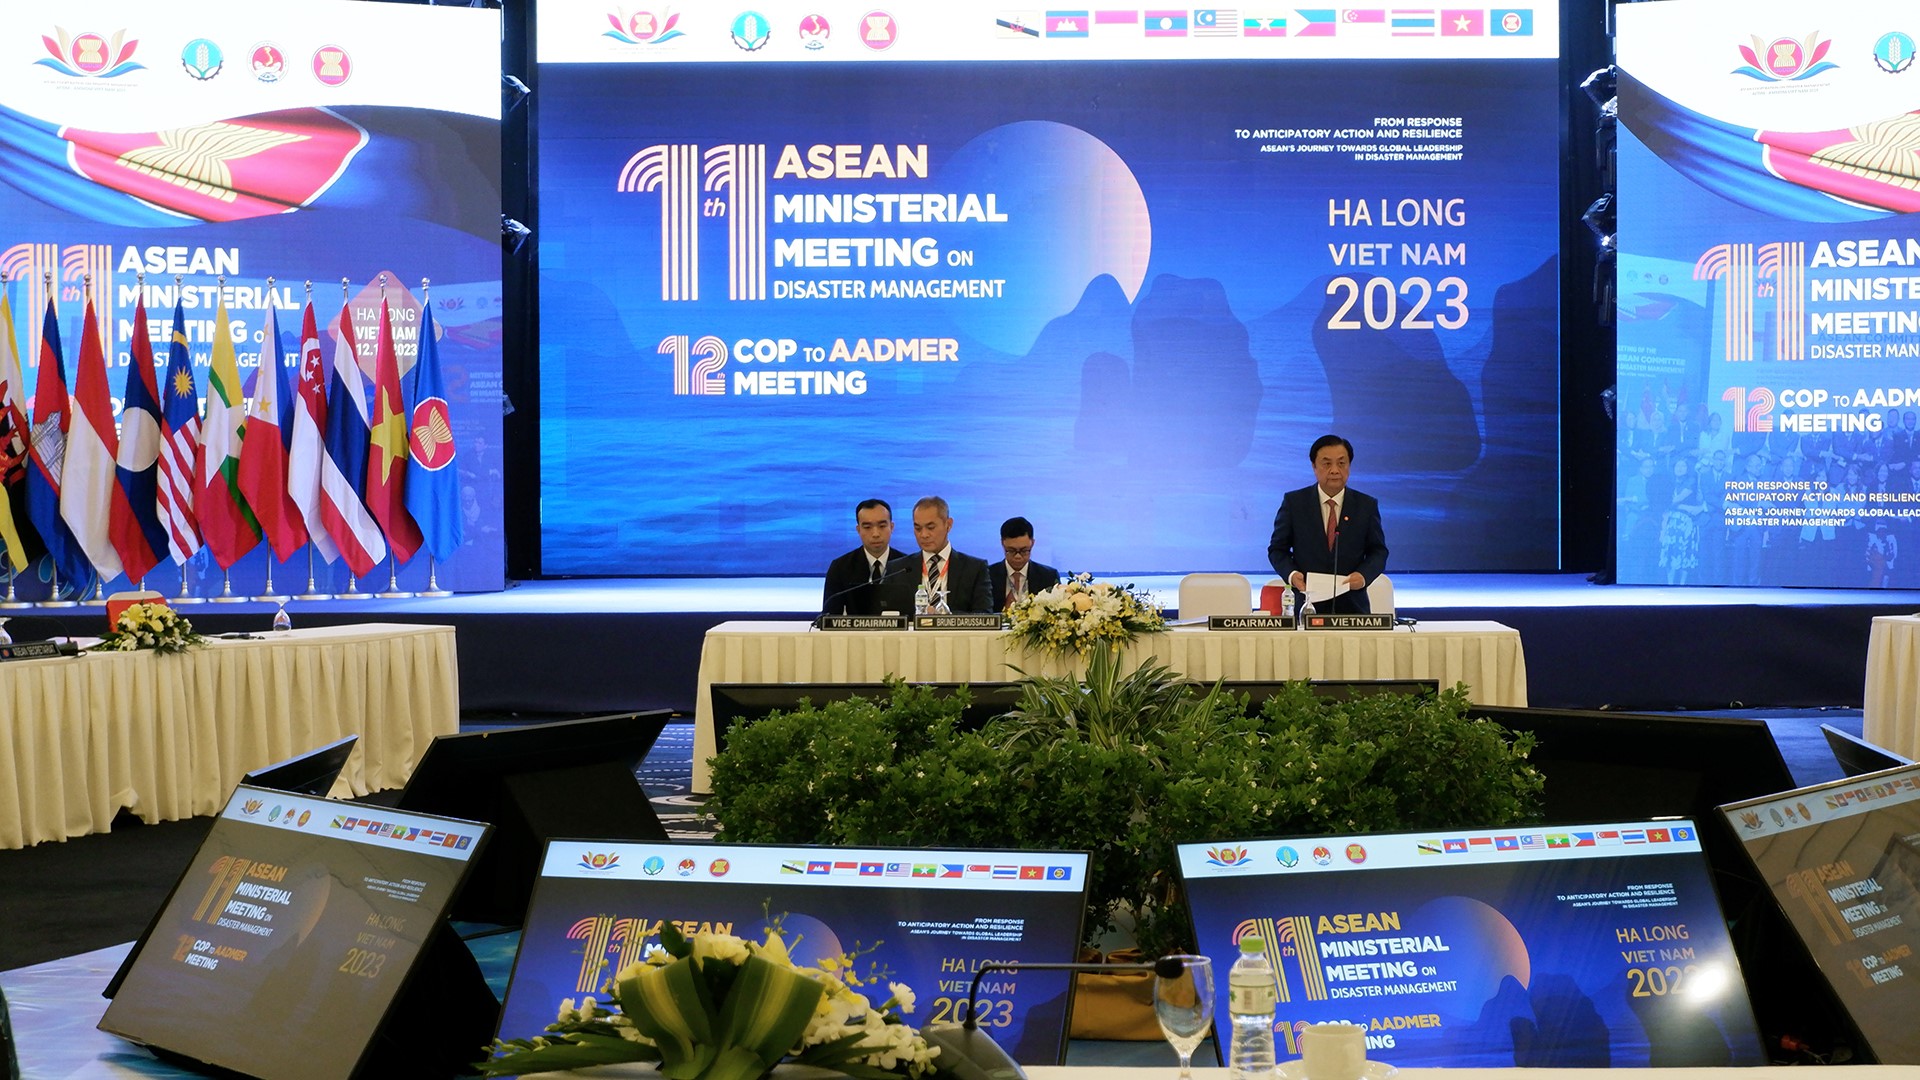 Minister Le Minh Hoan spoke at the opening of the 11th ASEAN Ministerial Meeting on Disaster Management (AMMDM). Photo: Bao Thang.